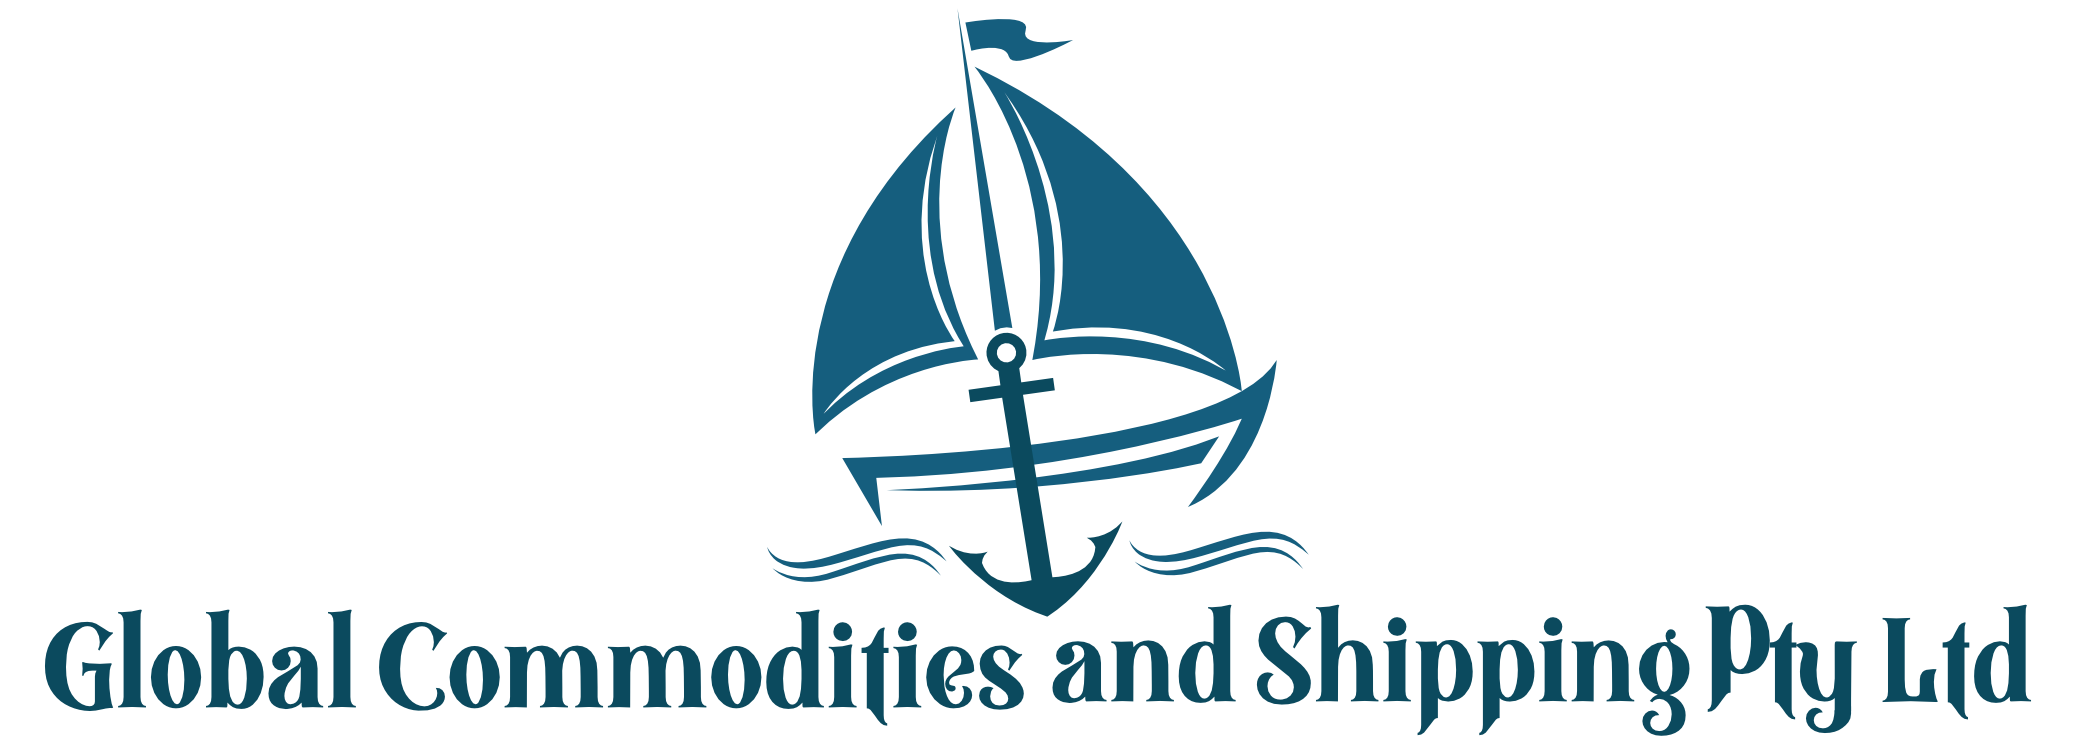 Global Commodities and Shipping Pty Ltd – Worldwide Marine Transportation Services